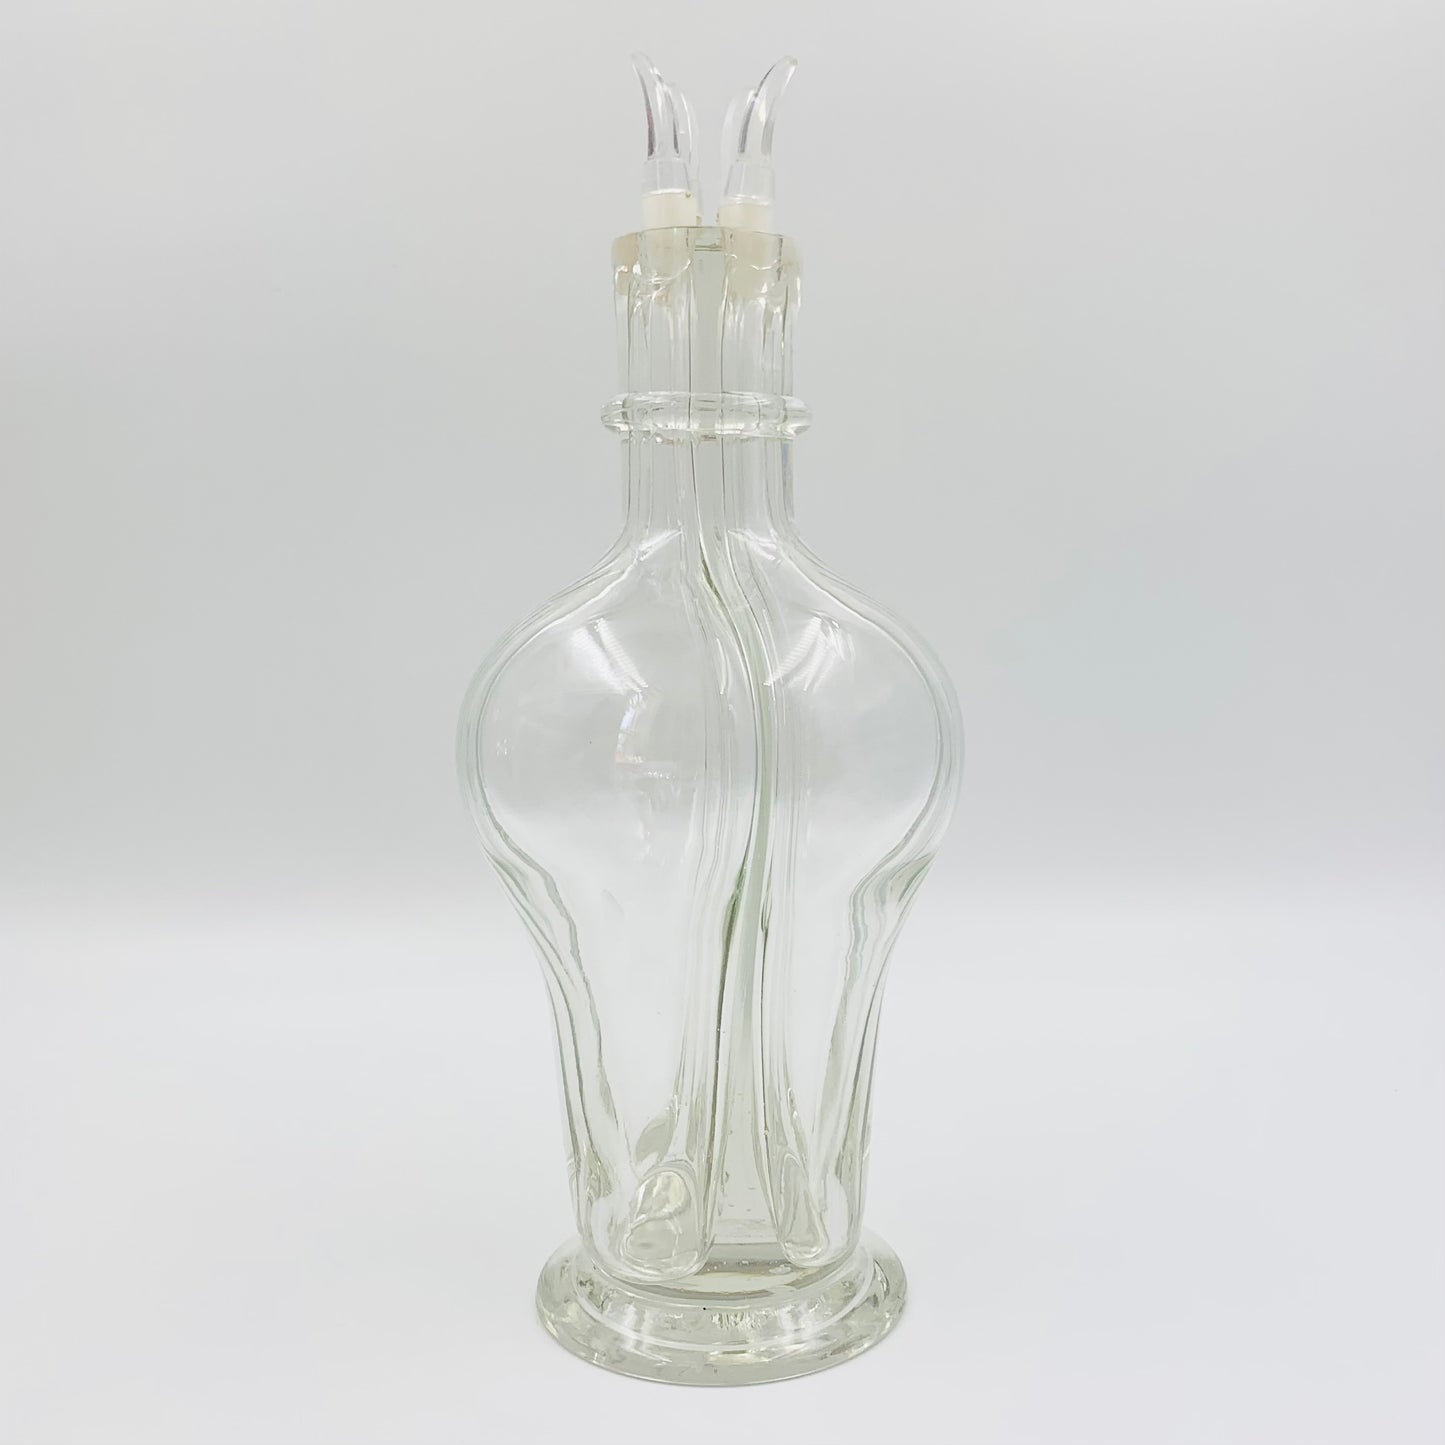 Rare French retro clear glass partitioned condiment decanter/bottle with original stopper